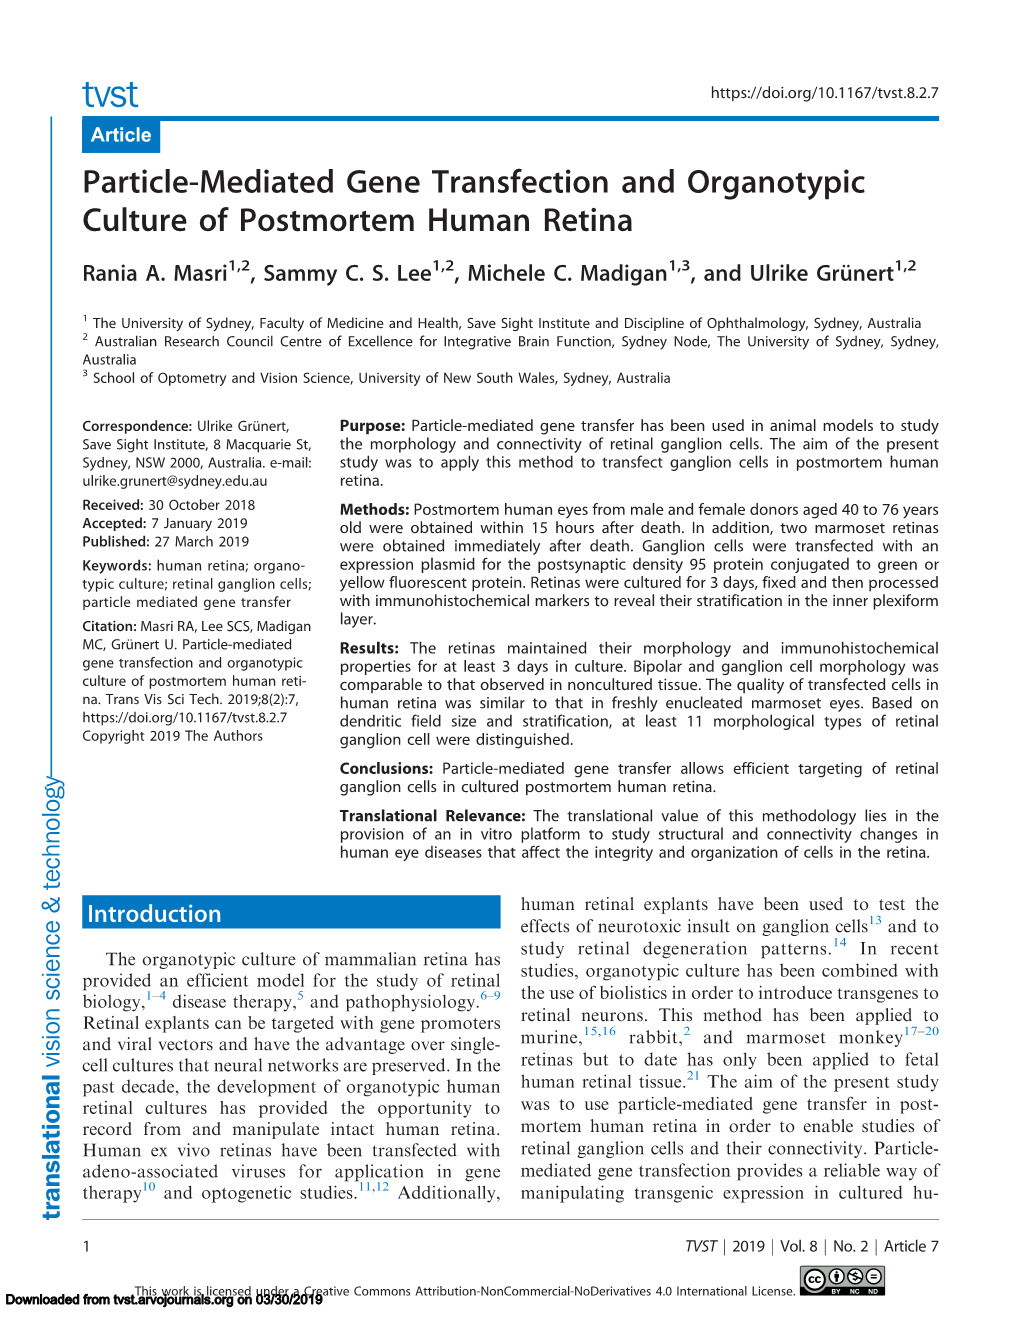 Particle-Mediated Gene Transfection and Organotypic Culture of Postmortem Human Retina